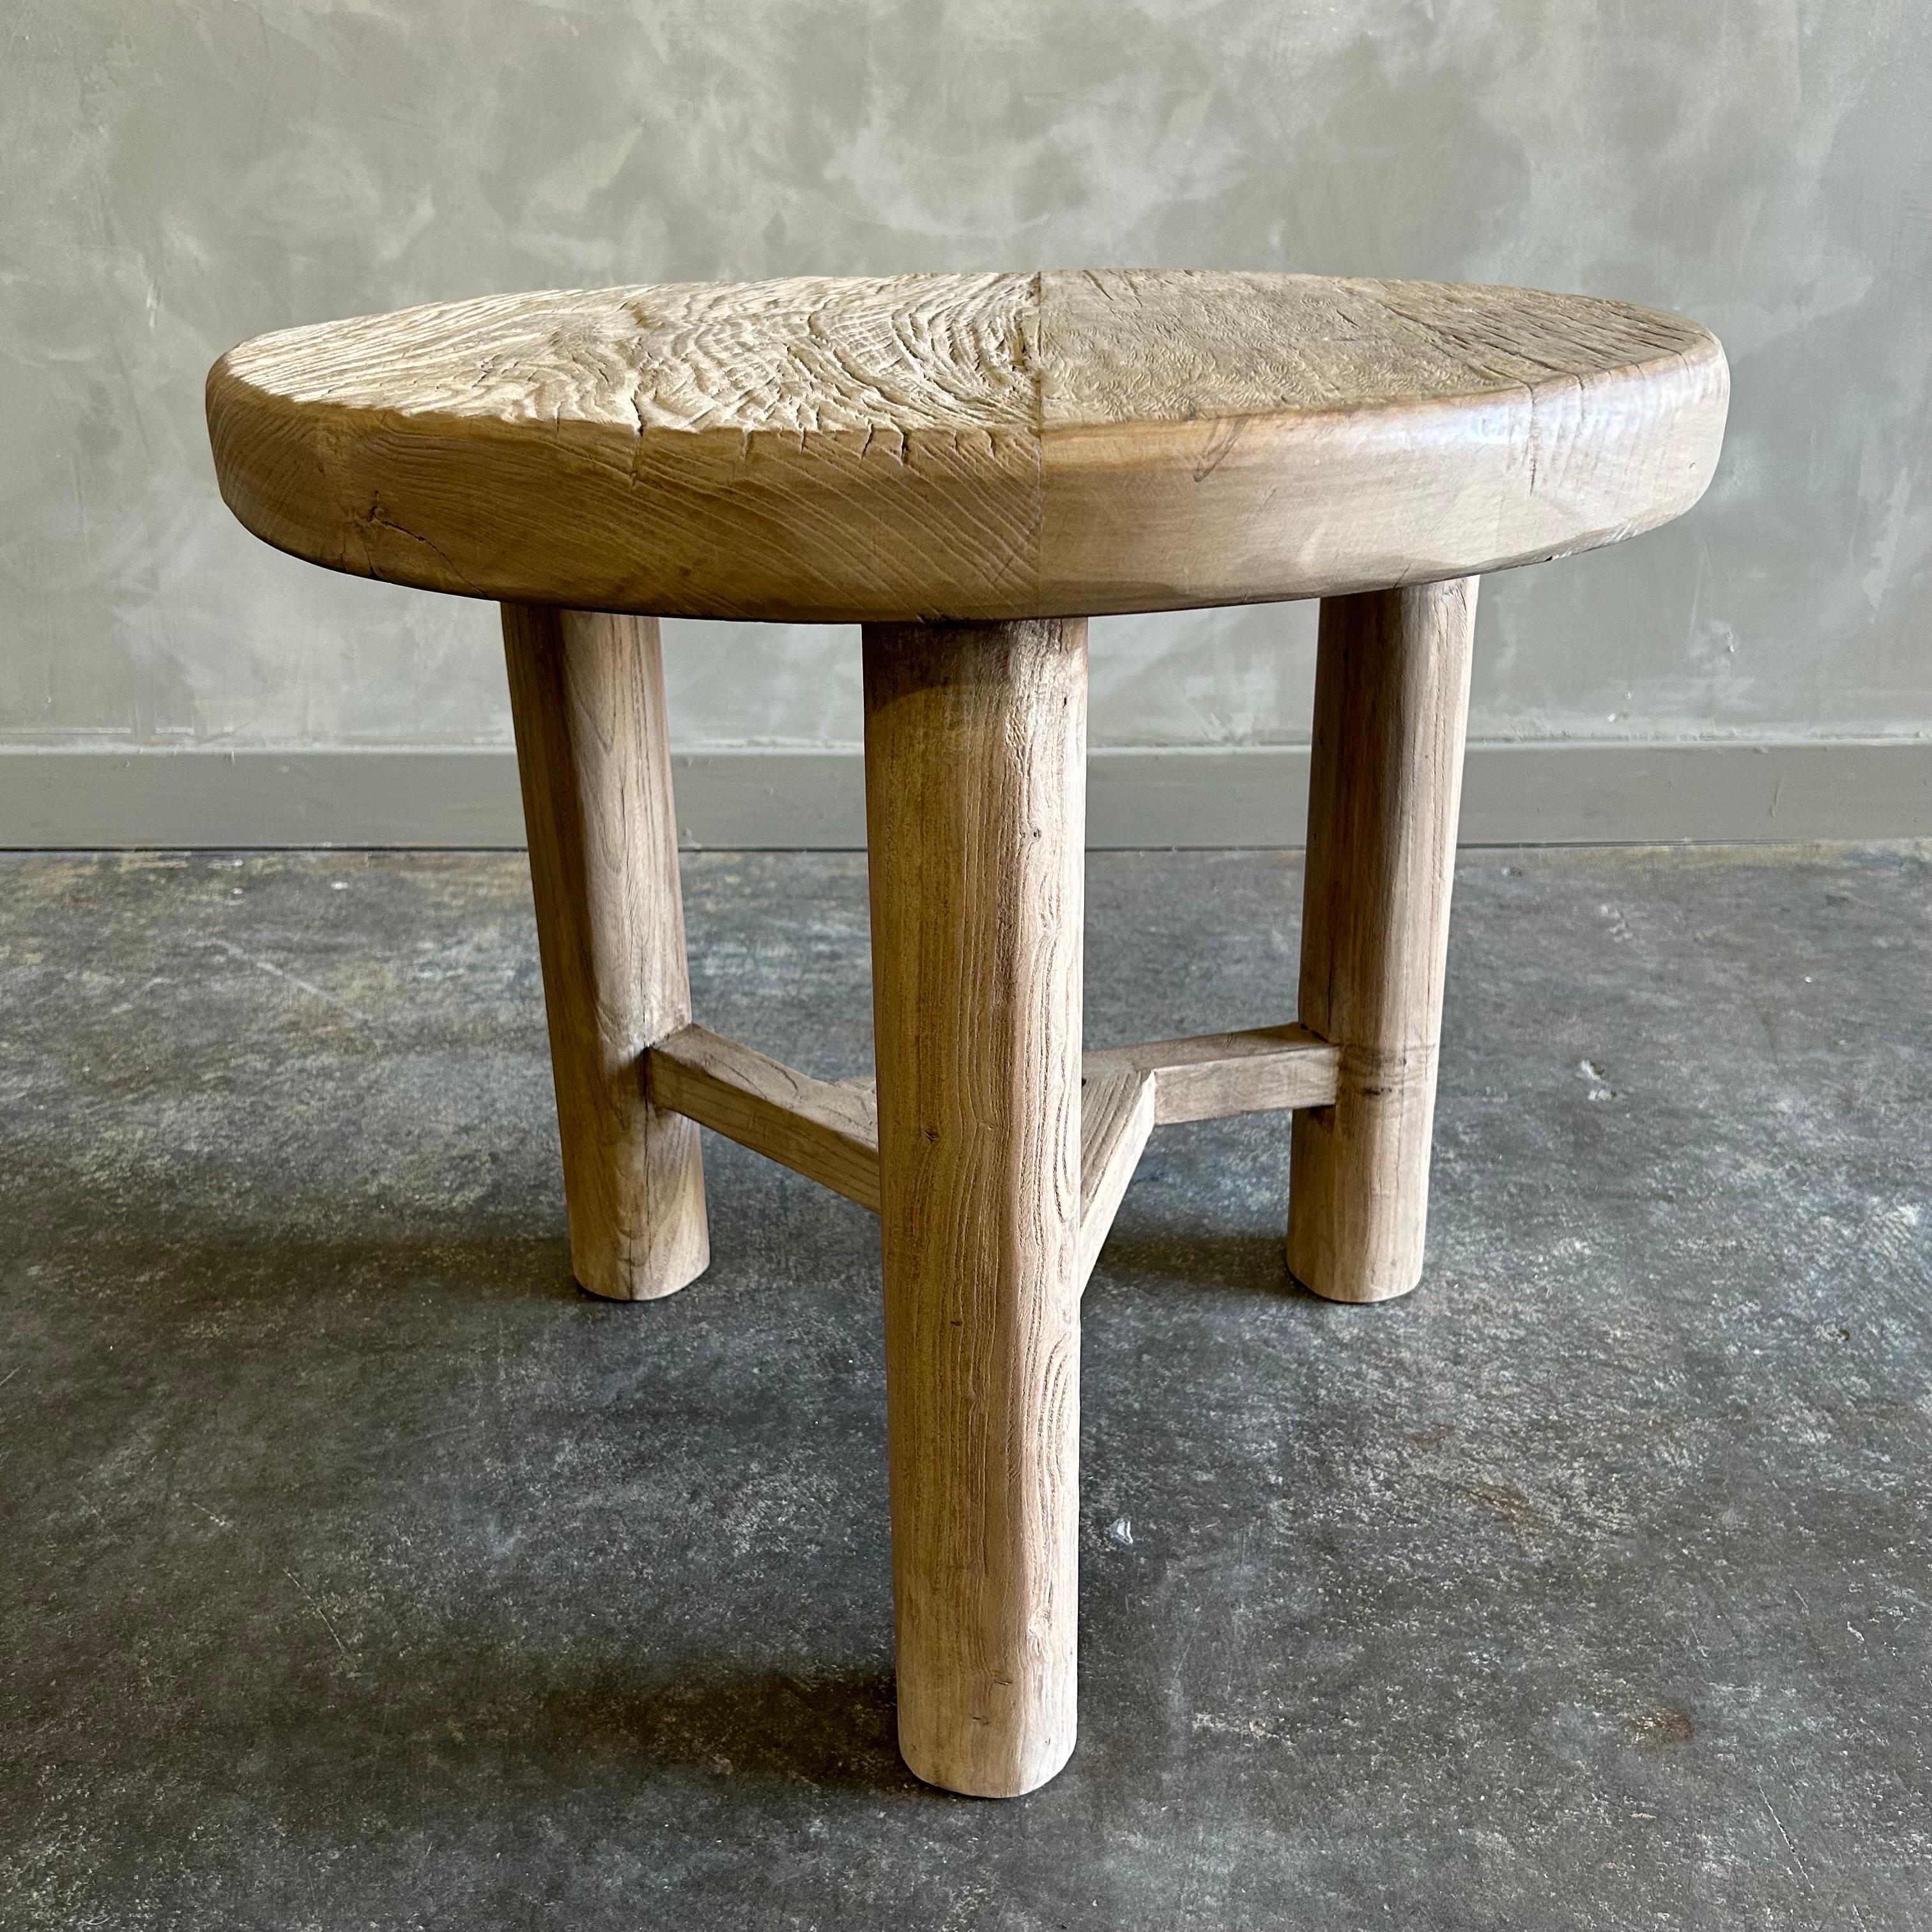 Custom Reclaimed Elm Wood Round Side Table with Round Legs In New Condition For Sale In Brea, CA